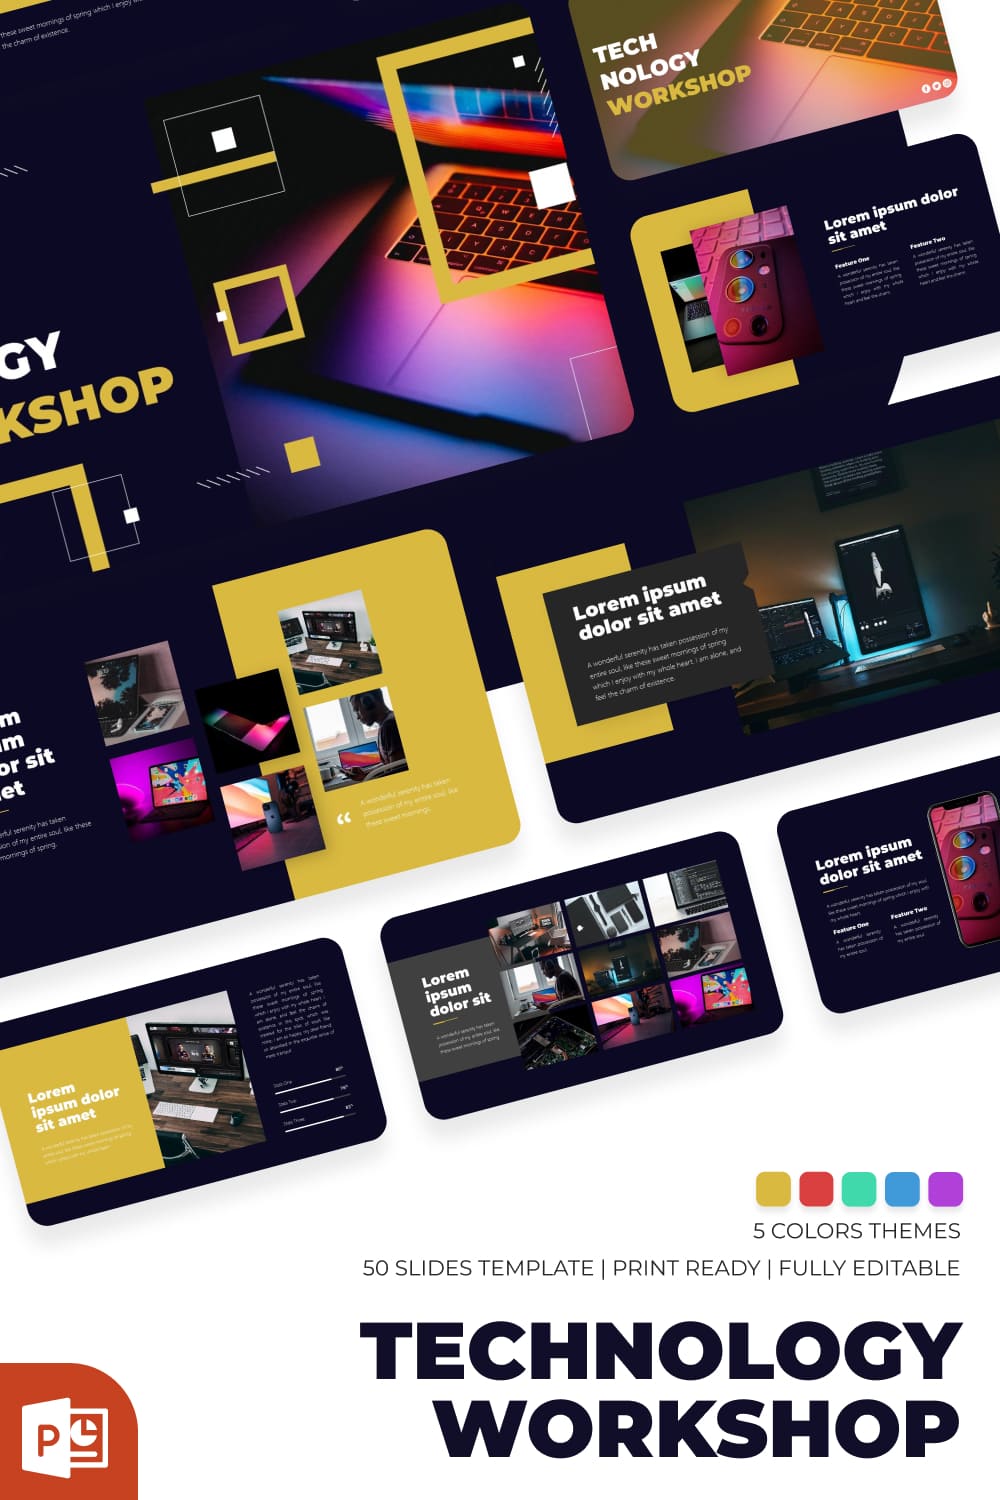 WorkshopTechnology PowerPoint Template.